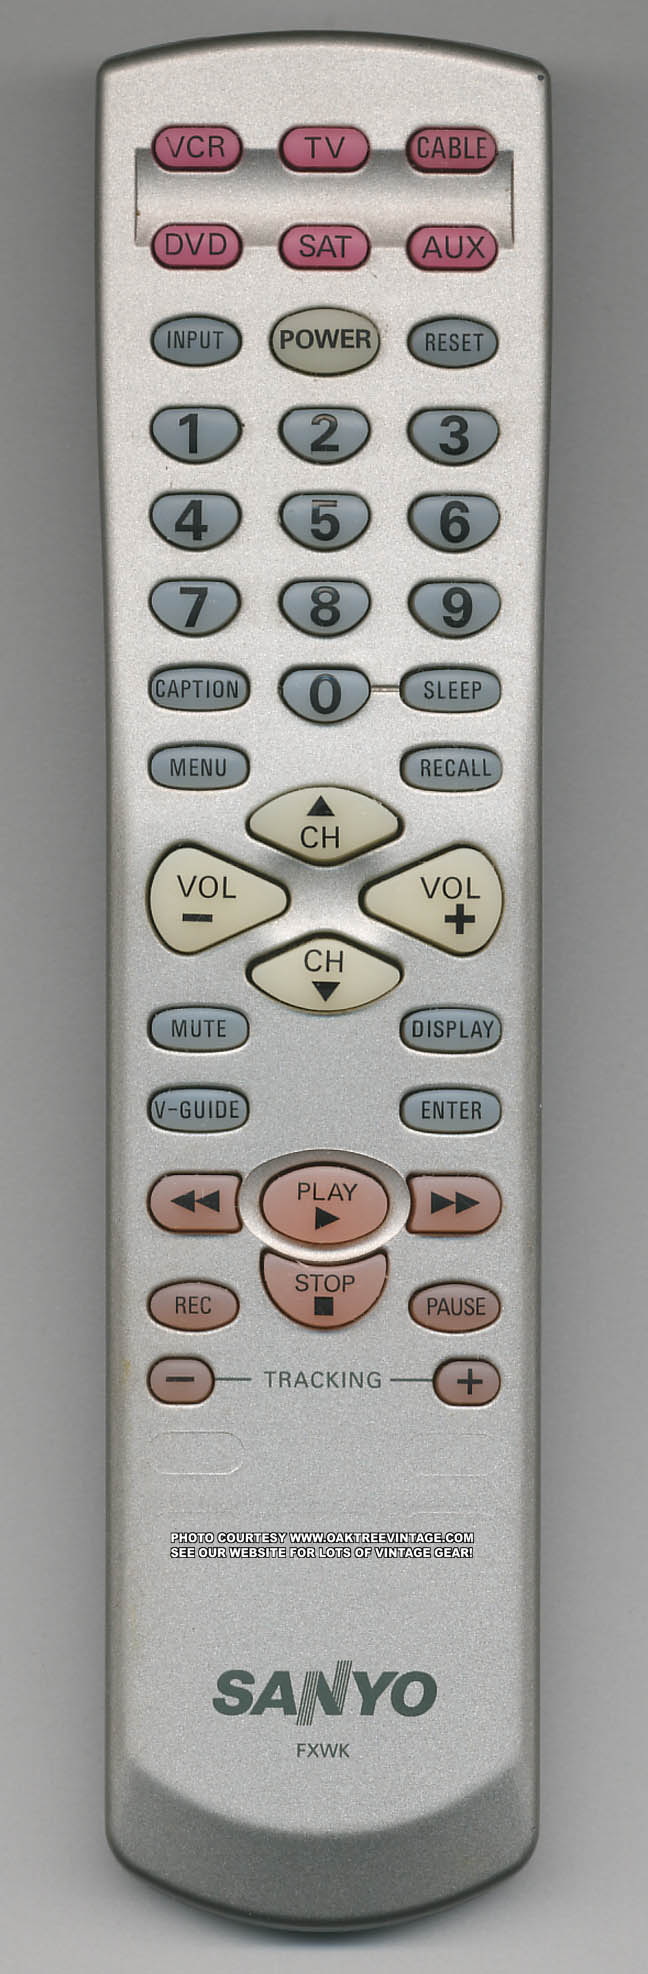 How To Program A Sanyo Remote